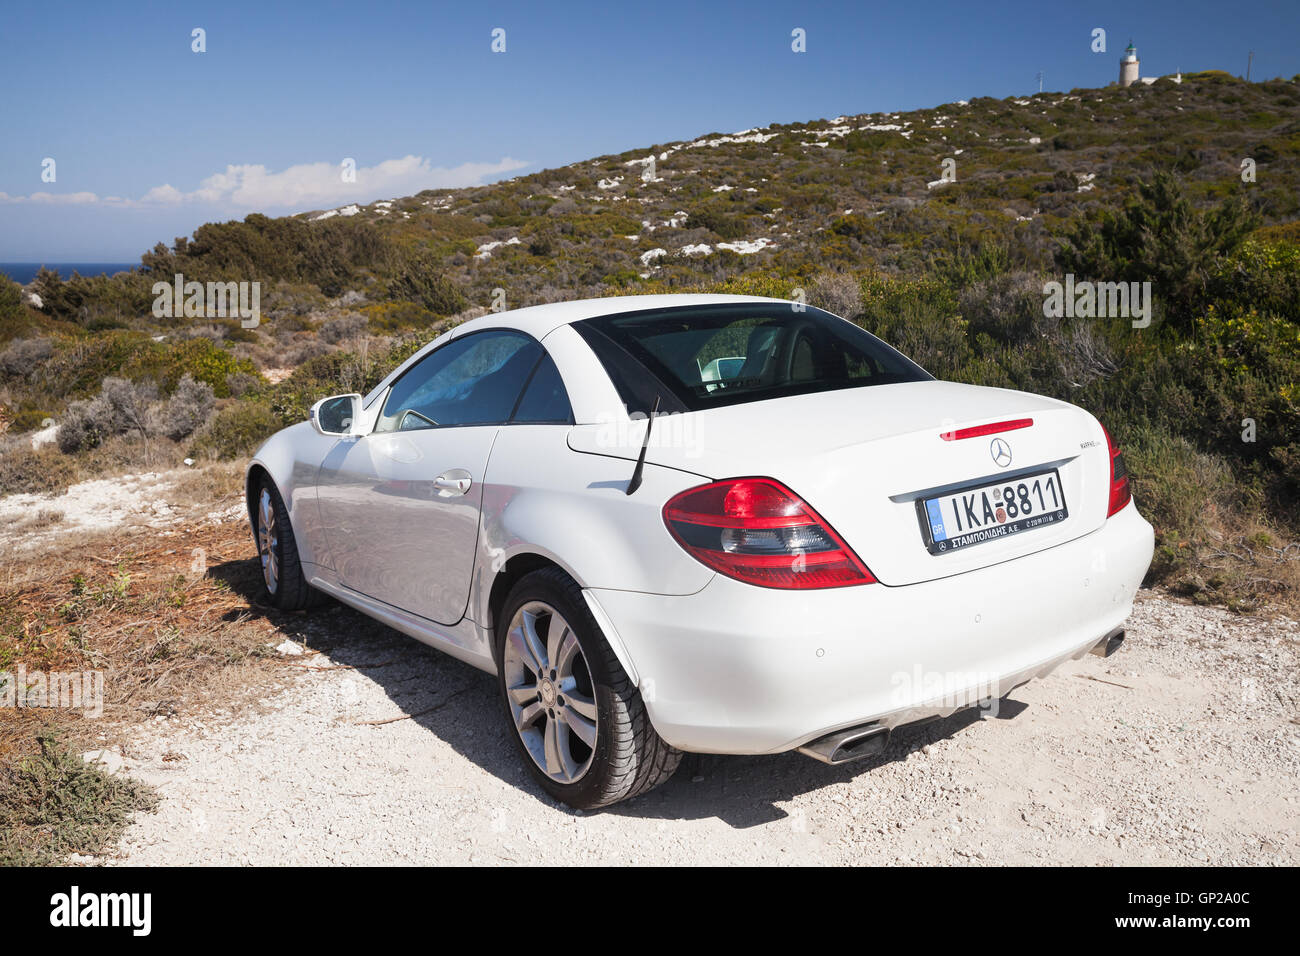 Zakynthos, Greece - August 20, 2016: White Mercedes-Benz SLK 200 pre-facelift car stands on the roadside in summer, rear view Stock Photo